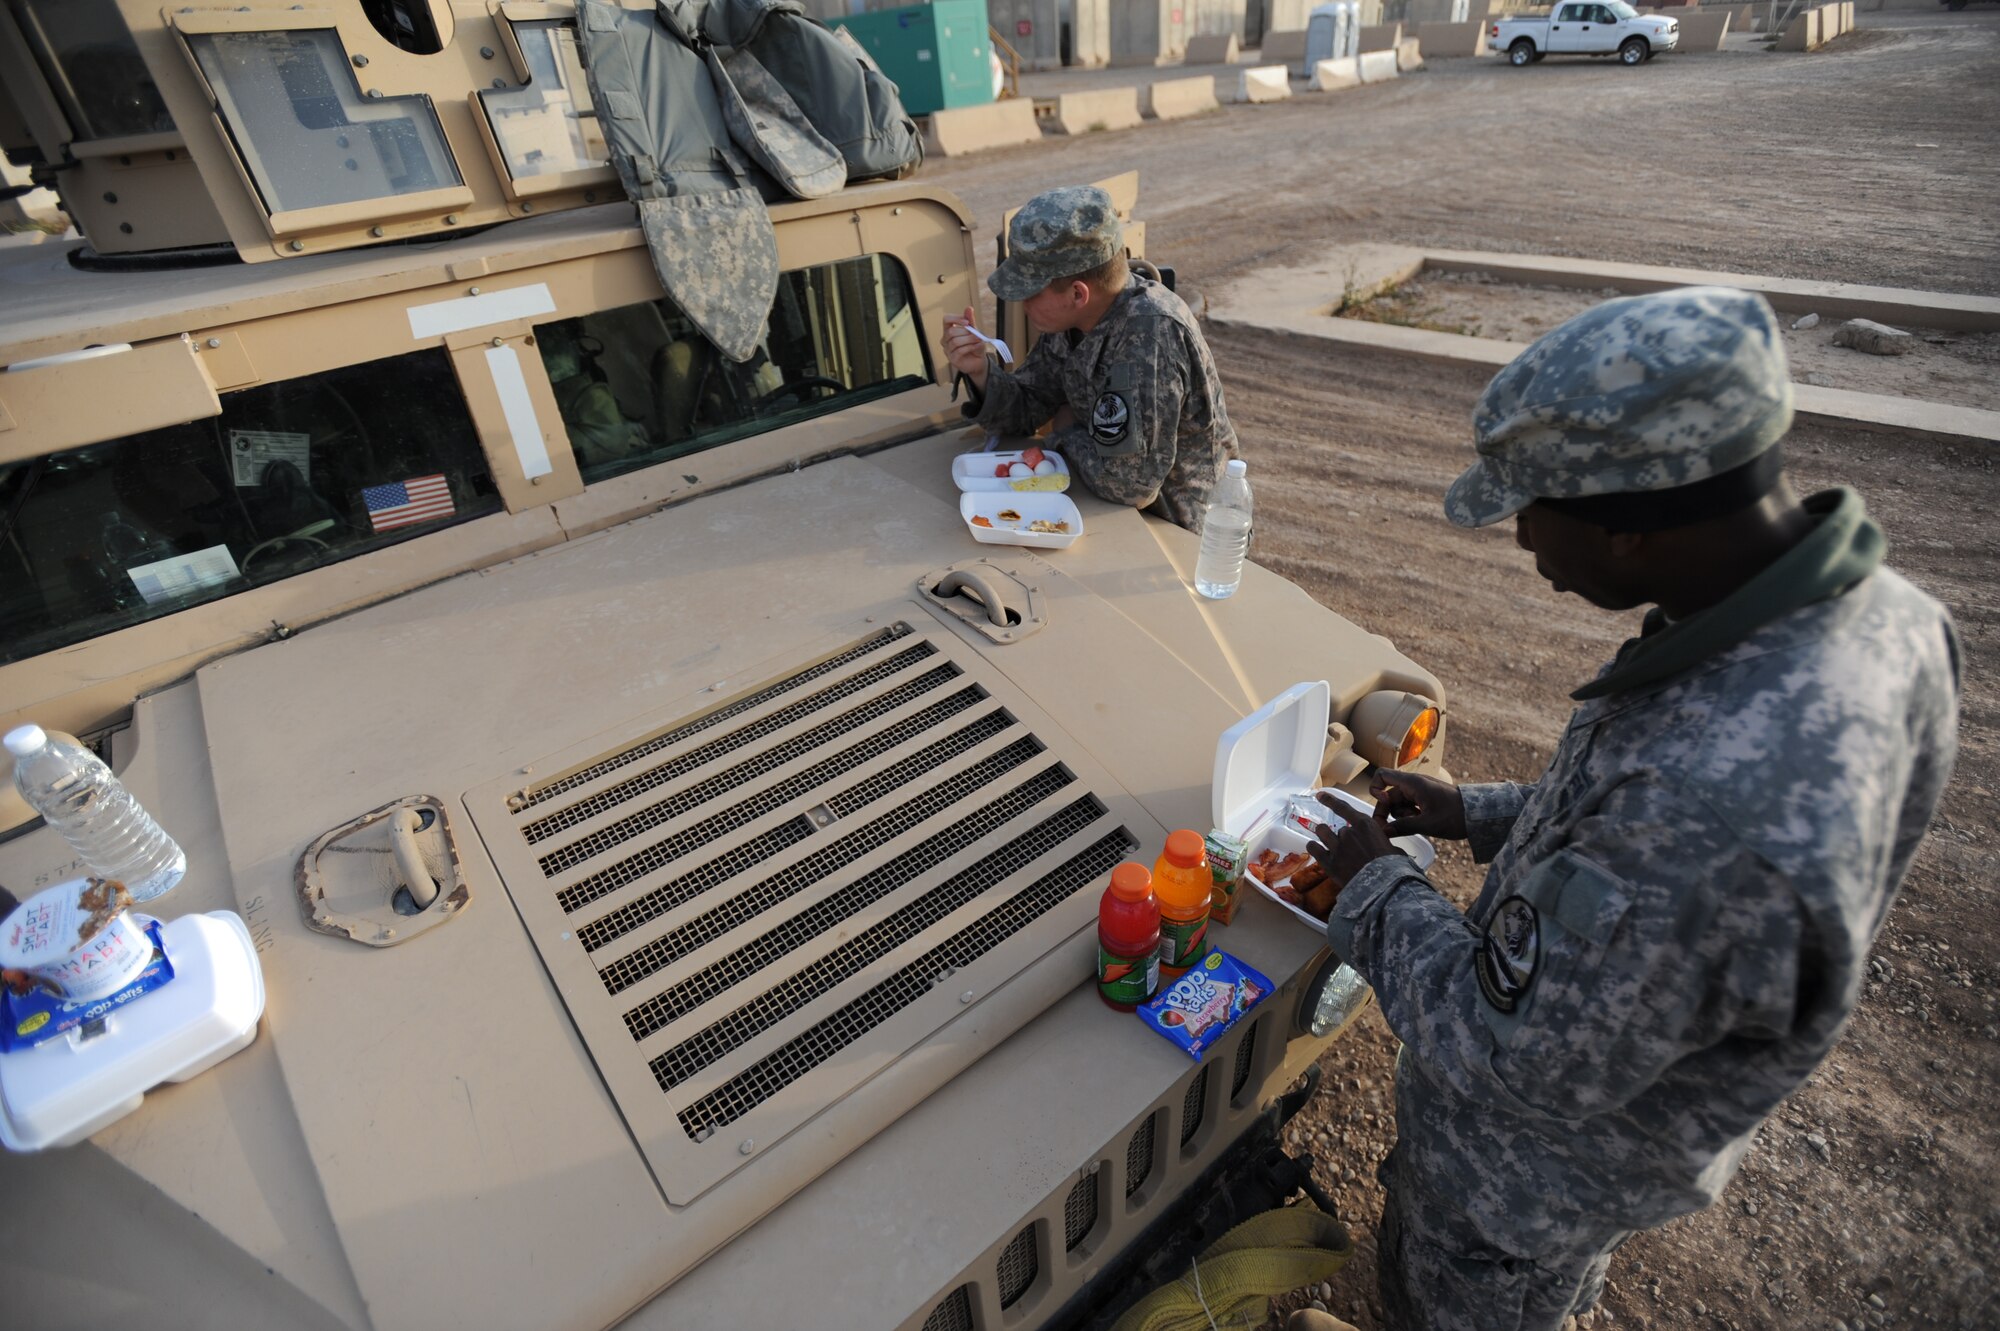 U.S. Air Force members of the 532nd Expeditionary Security Forces Squadron, eat breakfast at Joint Base Balad, Iraq, prior to departing for a mission  April 9, 2009, in support of Operation Iraqi Freedom.  (U.S. Air Force photo by Staff Sgt. James L. Harper Jr.)